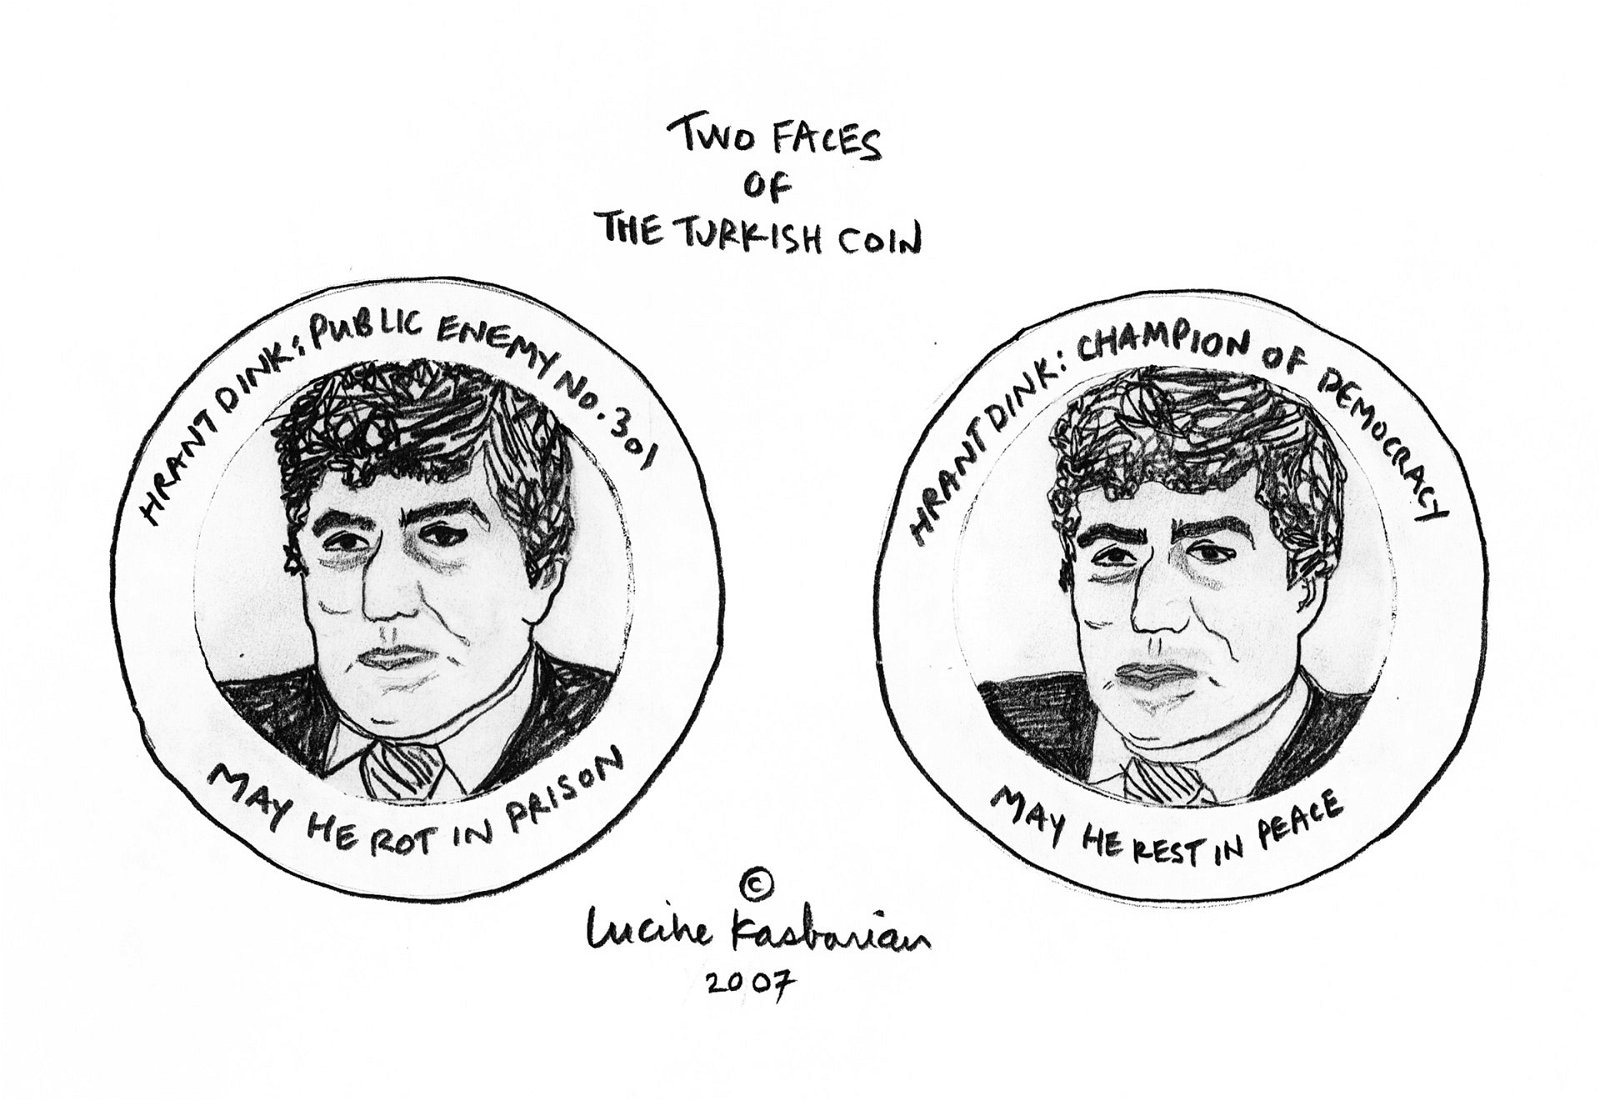 It was the murder of Armenian journalist Hrant Dink by a Turkish gunman in front of Dink's newspaper office in Istanbul in 2007 that was the impetus in Kasbarian's career as a political cartoonist